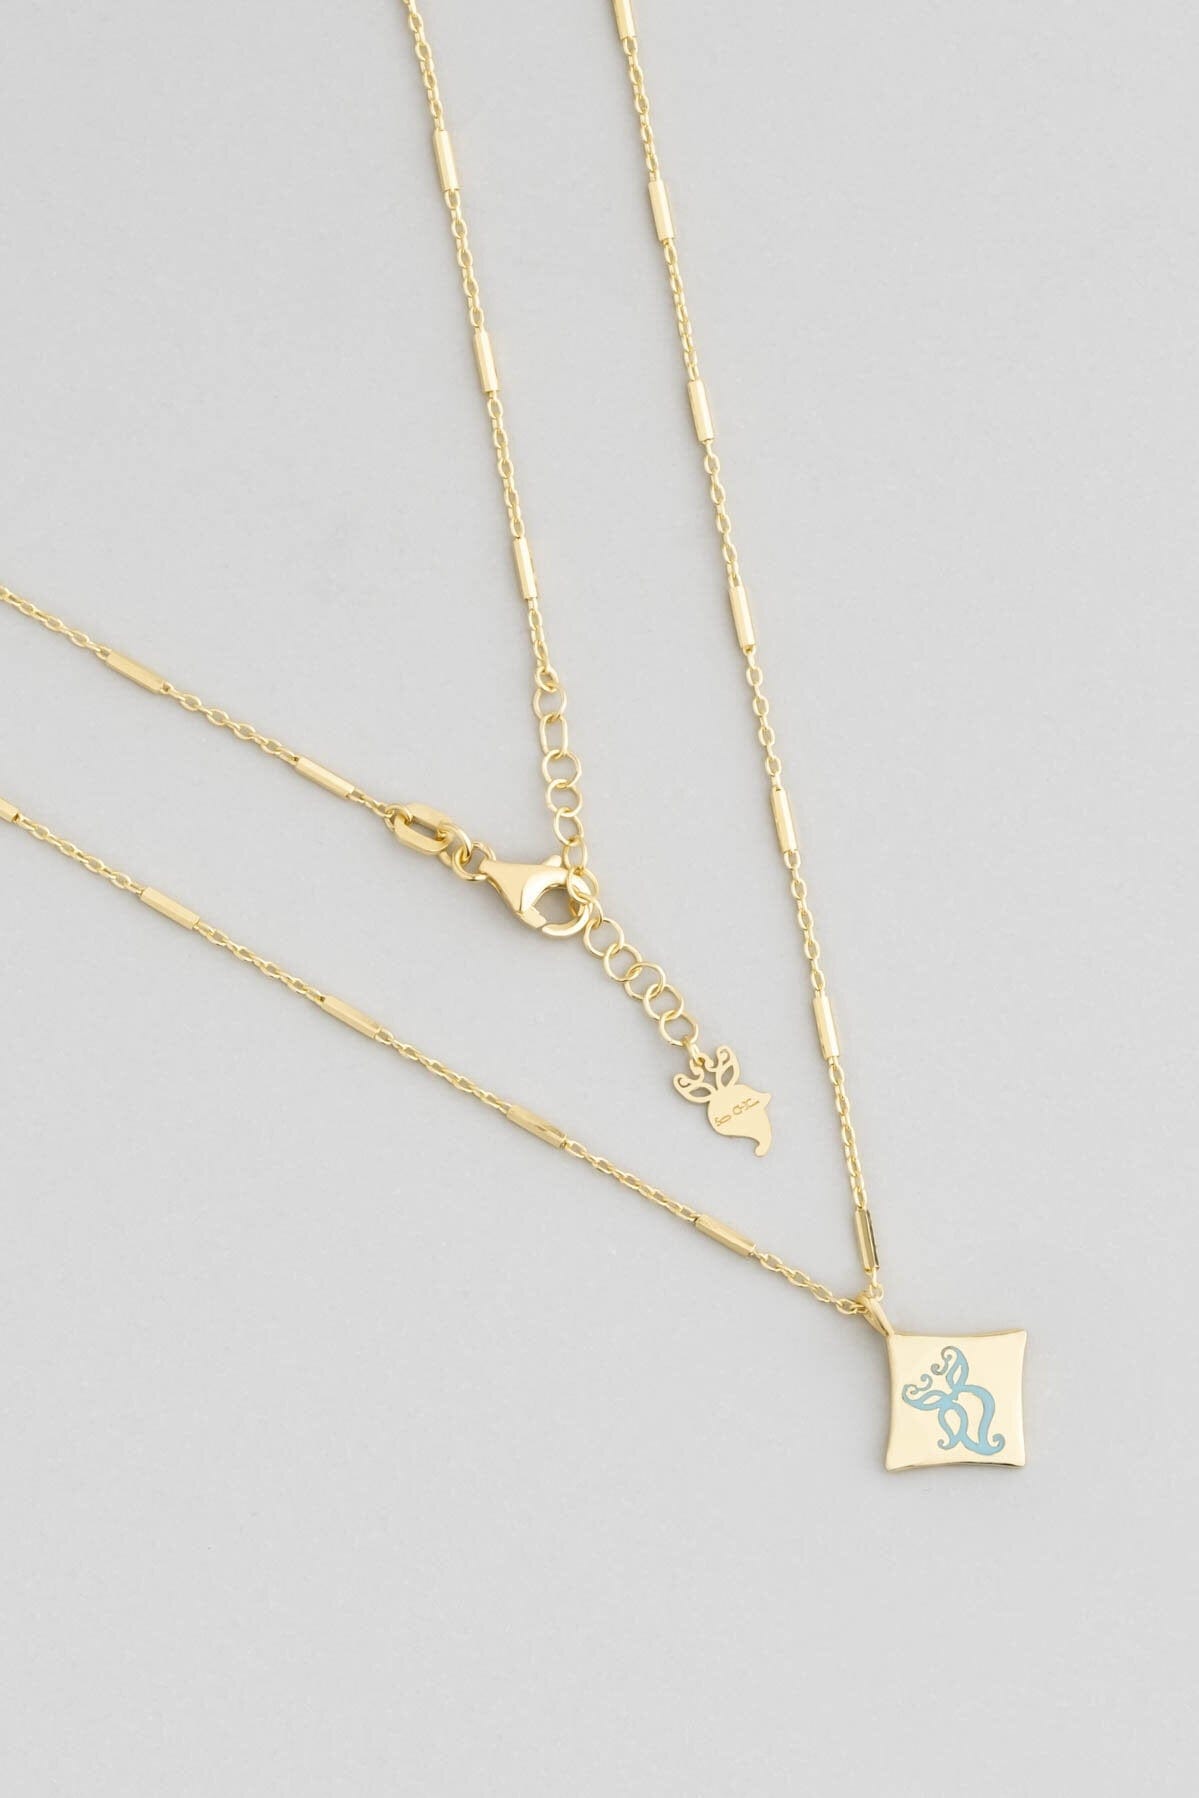 Wise Spirit 18K Yellow Gold Plated Silver Necklace 46 Cm